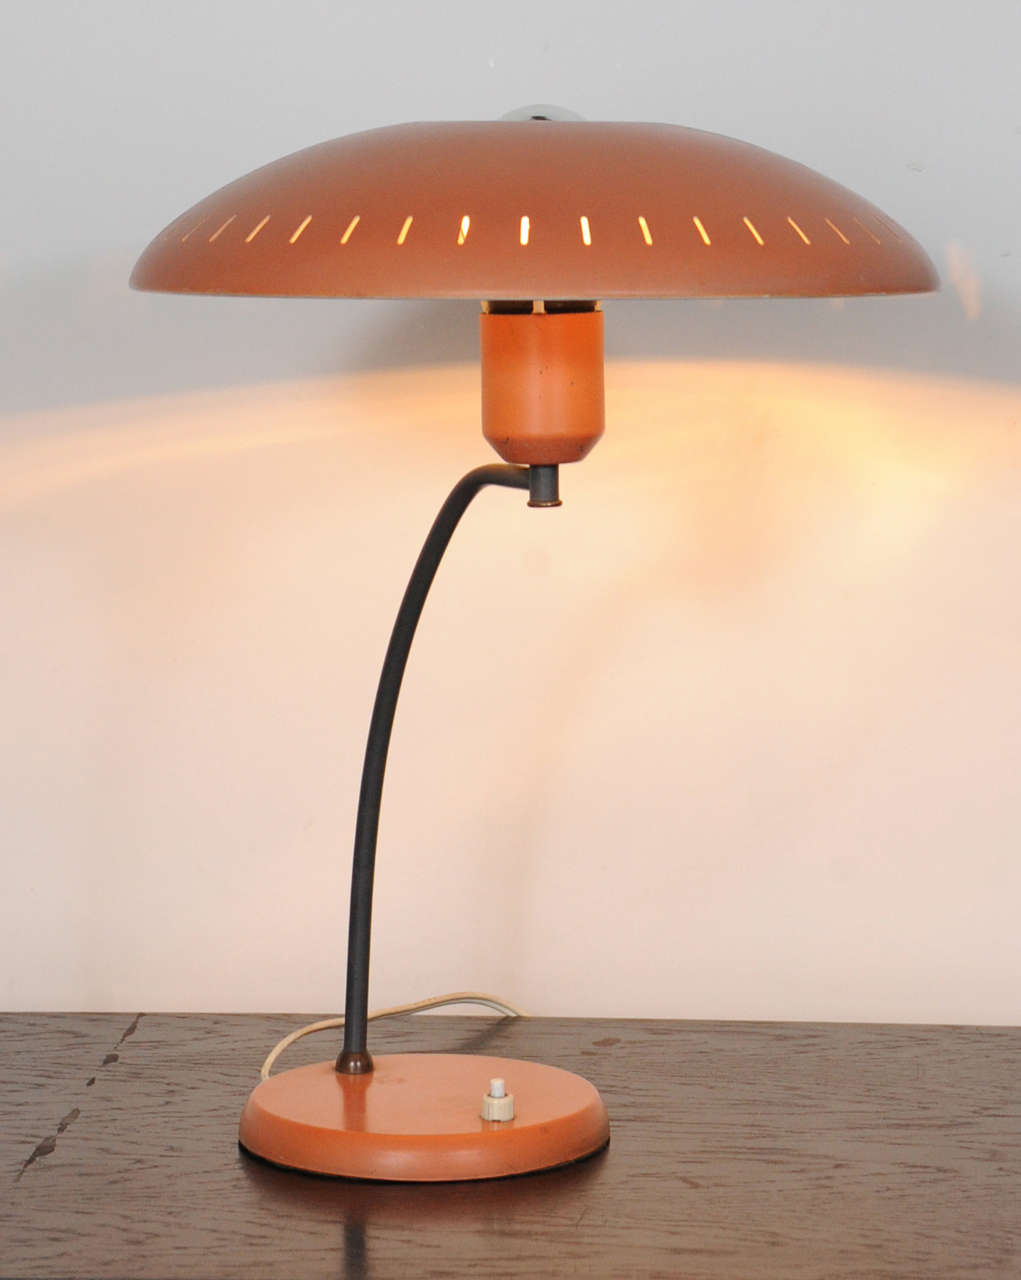 Beautiful salmon / red lacquered pair of desk light designed by the famous Dutch designer and architect Louis Kalff for the company Philips in the 1950's. The shade has a hole intended for a chrome-top lightbulb (comes with it) This light shade was